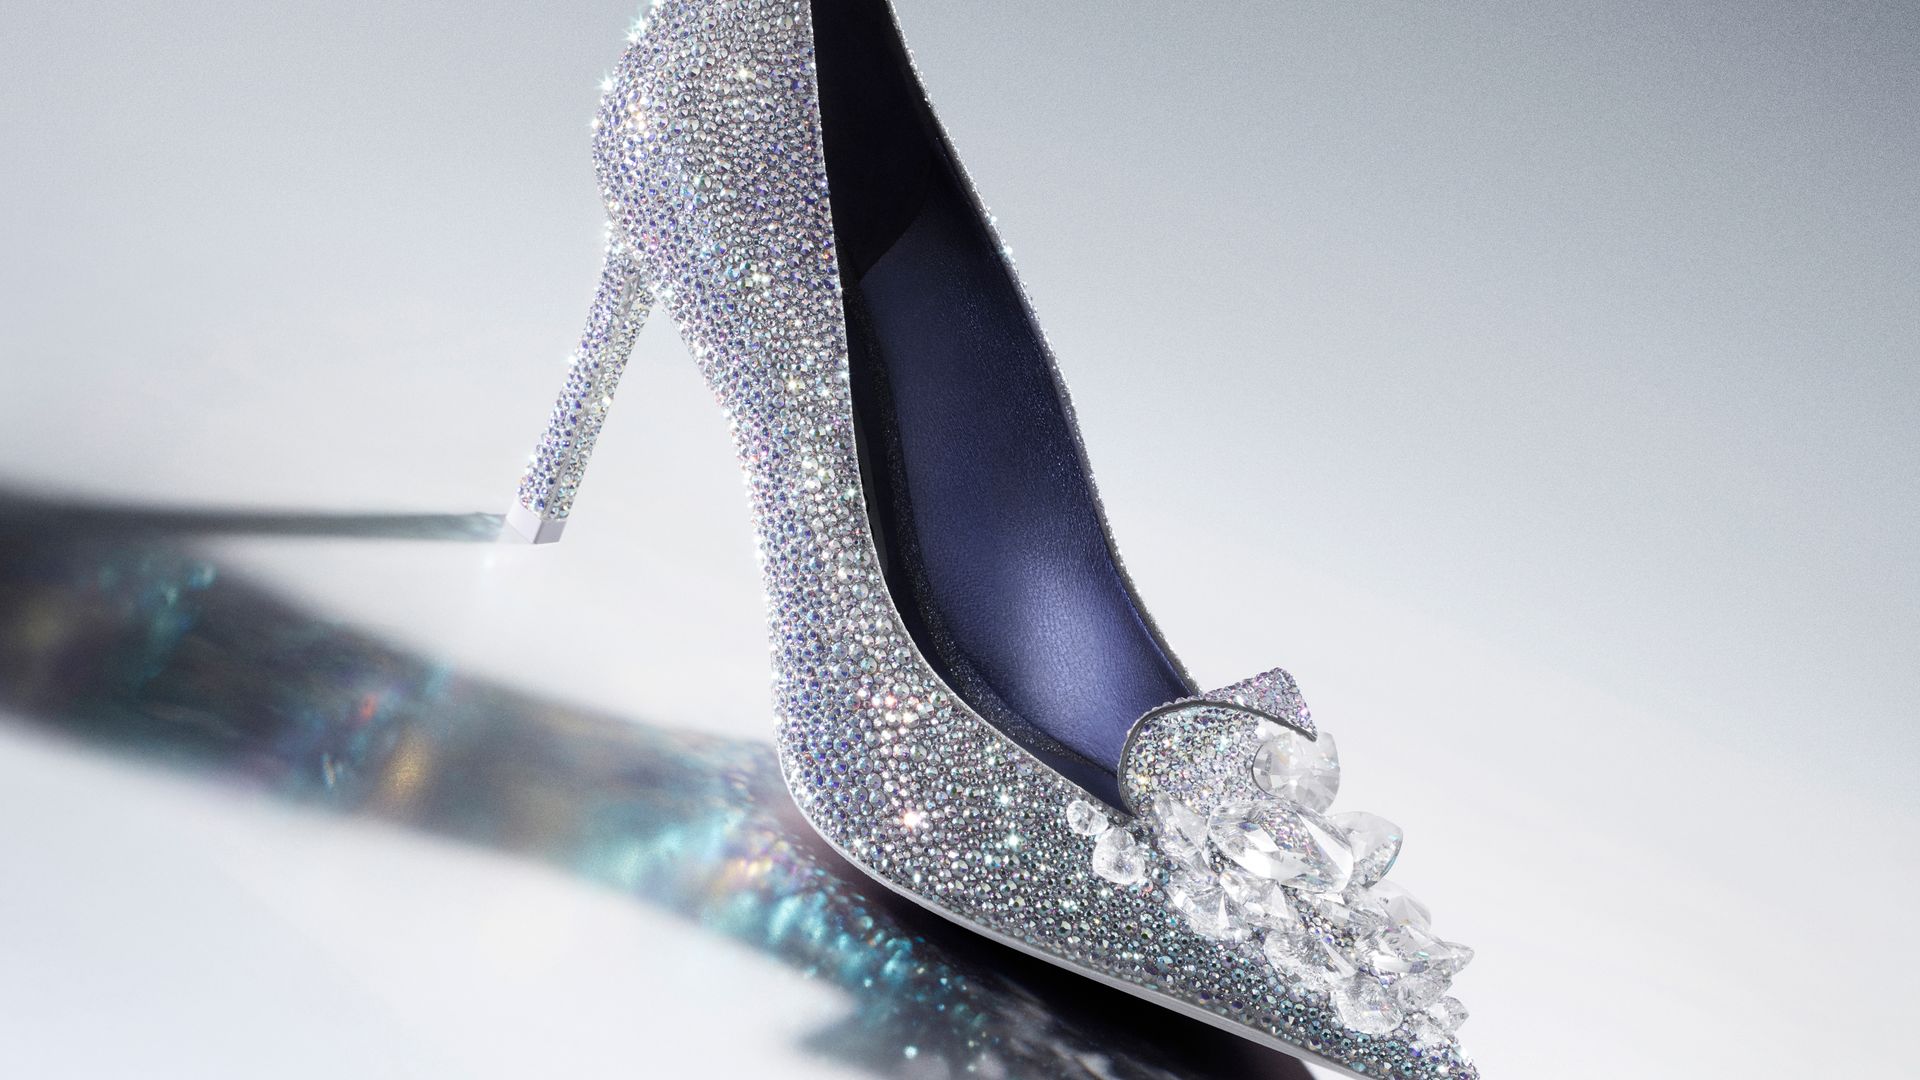 Jimmy Choo just dropped a real-life version of Cinderella's glass slippers